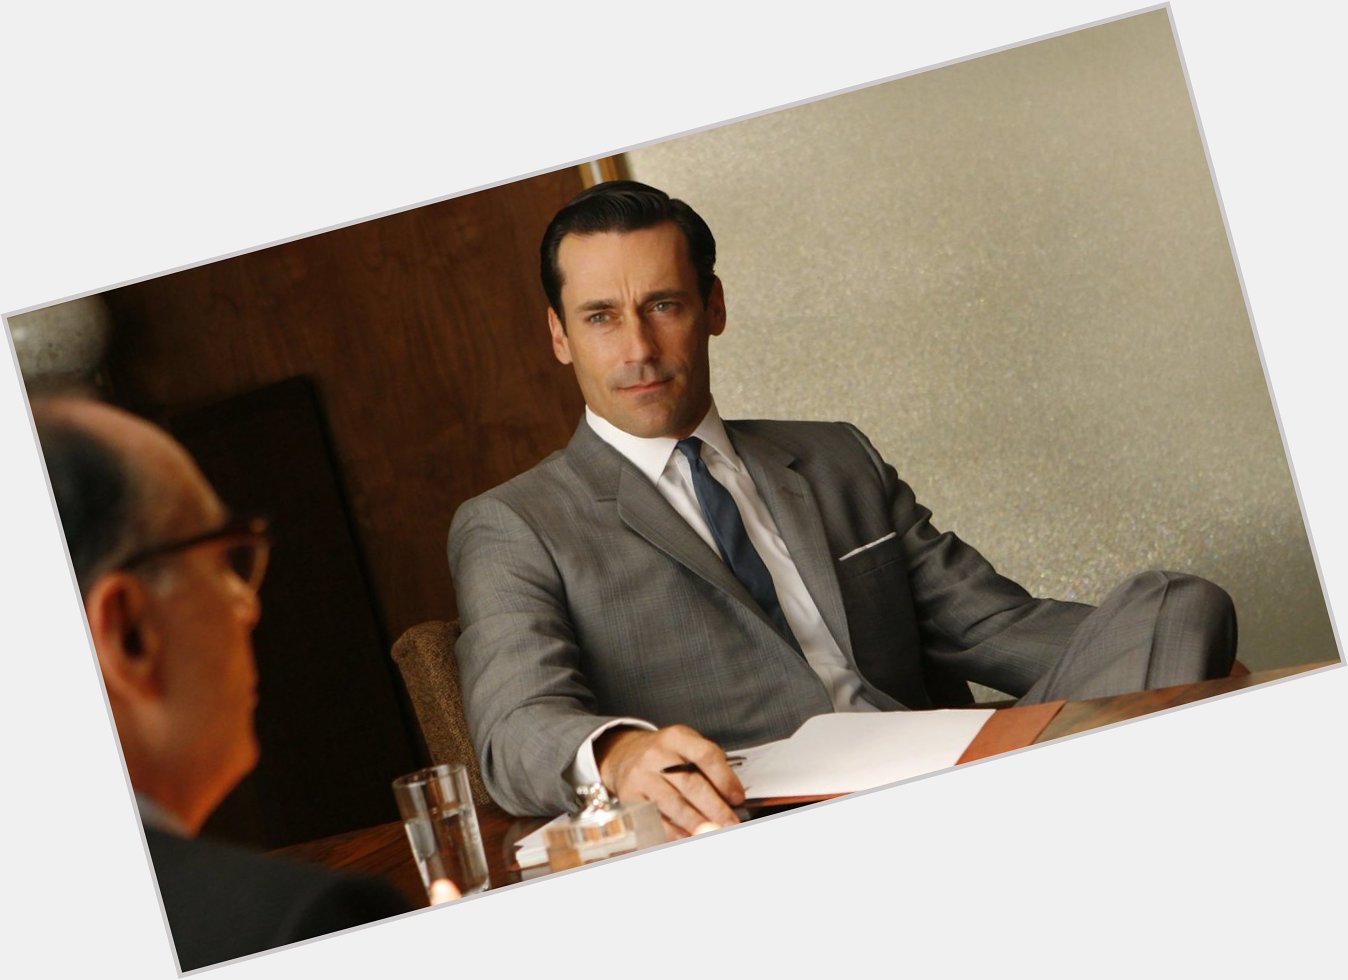 Happy Birthday Jon Hamm! His performance as Don Draper is easily one of my favourites & one of the best ever. 